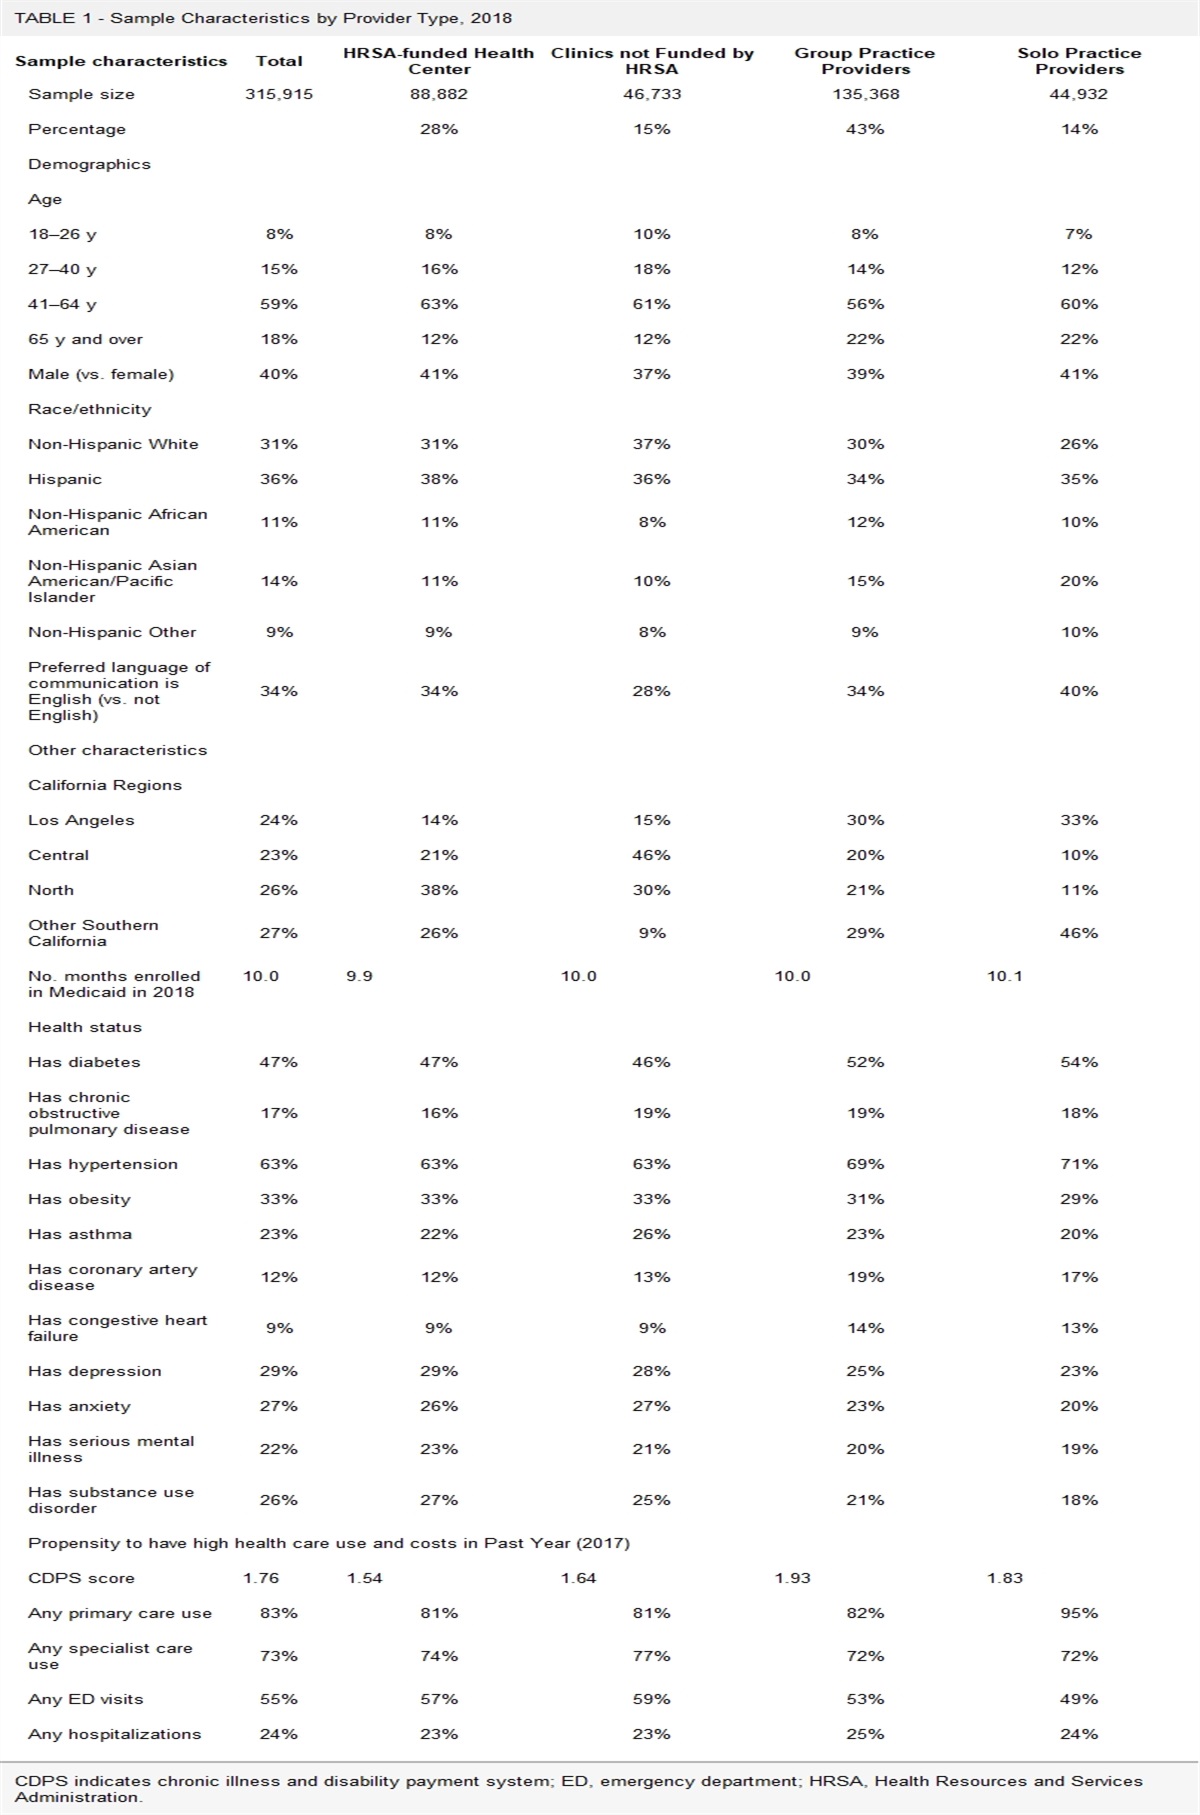 Differences in Health Care Utilization of High-Need and High-Cost Patients of Federally Funded Health Centers Versus Other Primary Care Providers